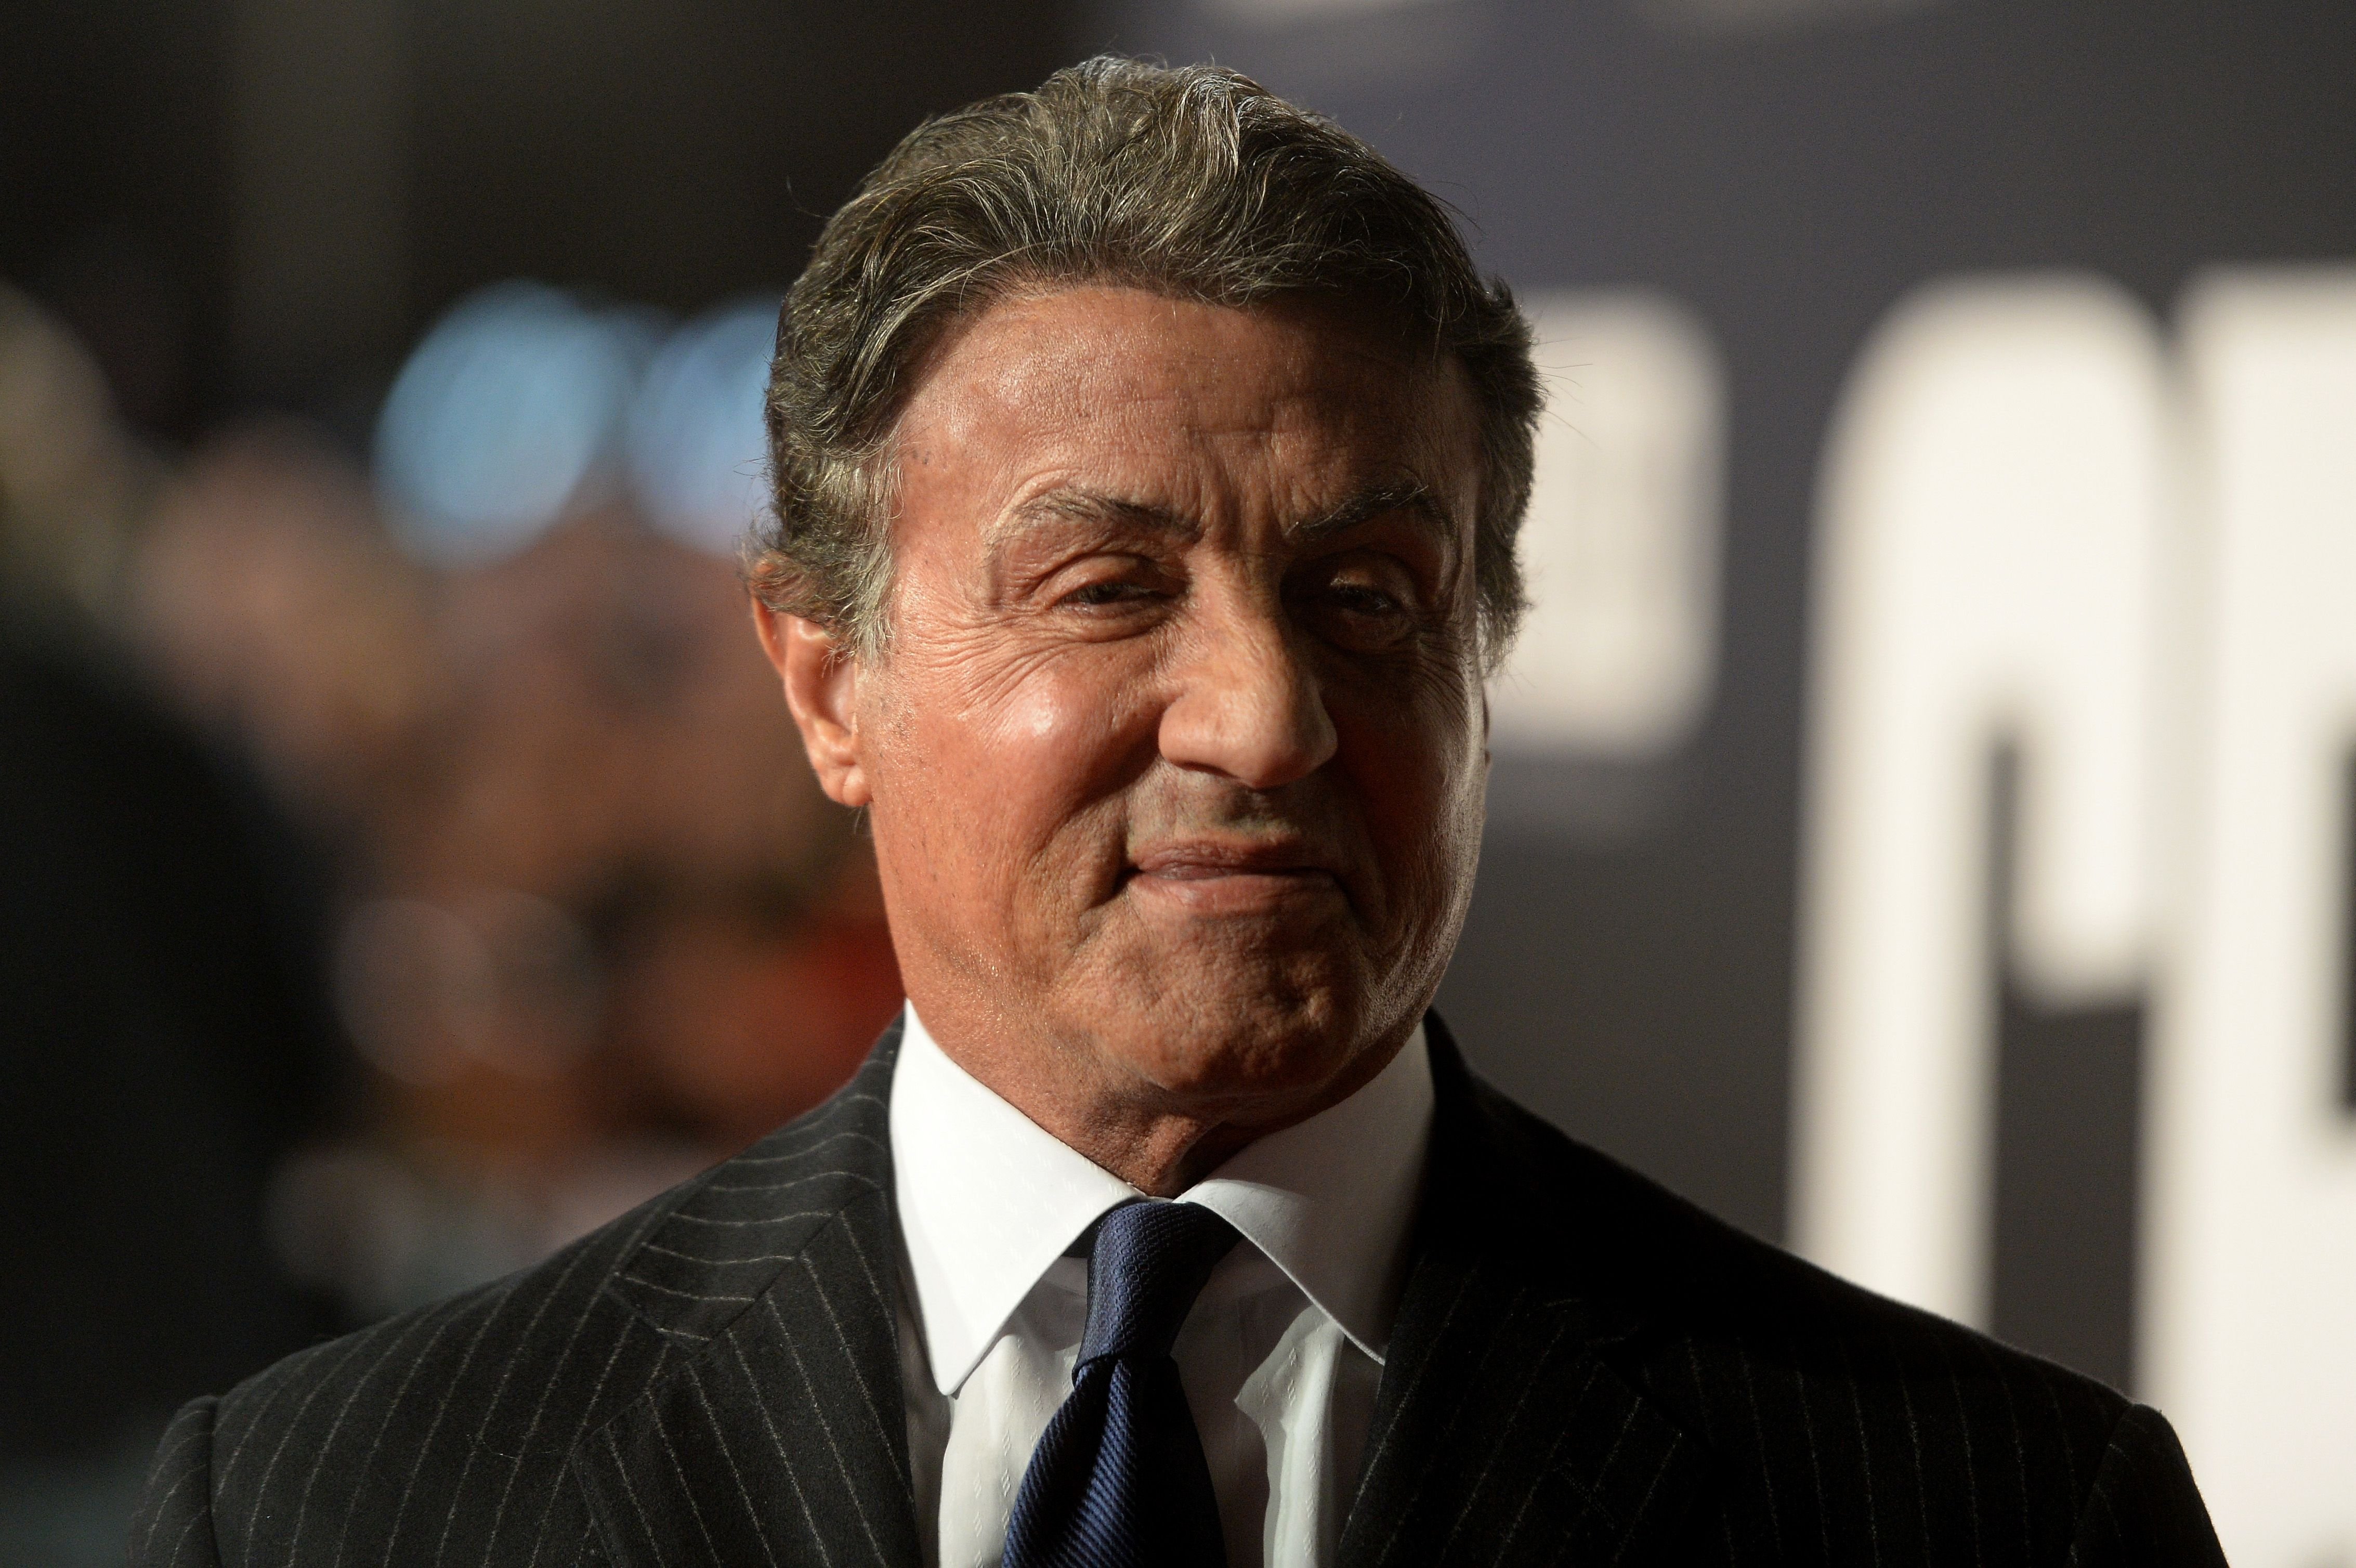 Sylvester Stallone attends the European Premiere of "Creed" at Empire Leicester Square on January 12, 2016  | Photo: Getty Images.